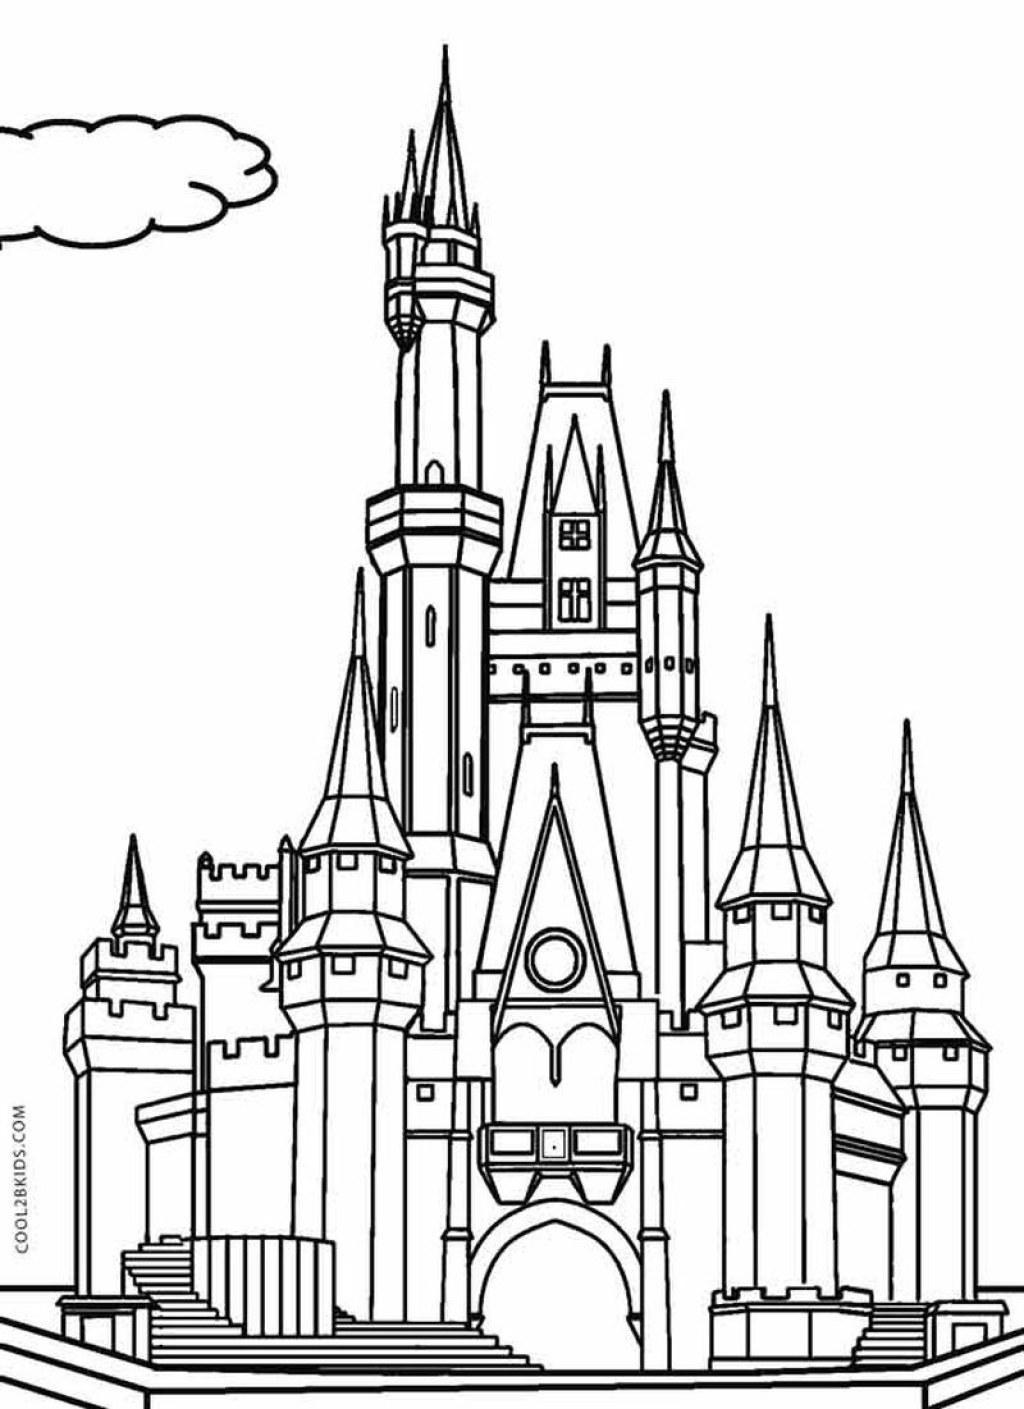 Picture of: Castle Coloring Pages Printable  Castle coloring page, Disney